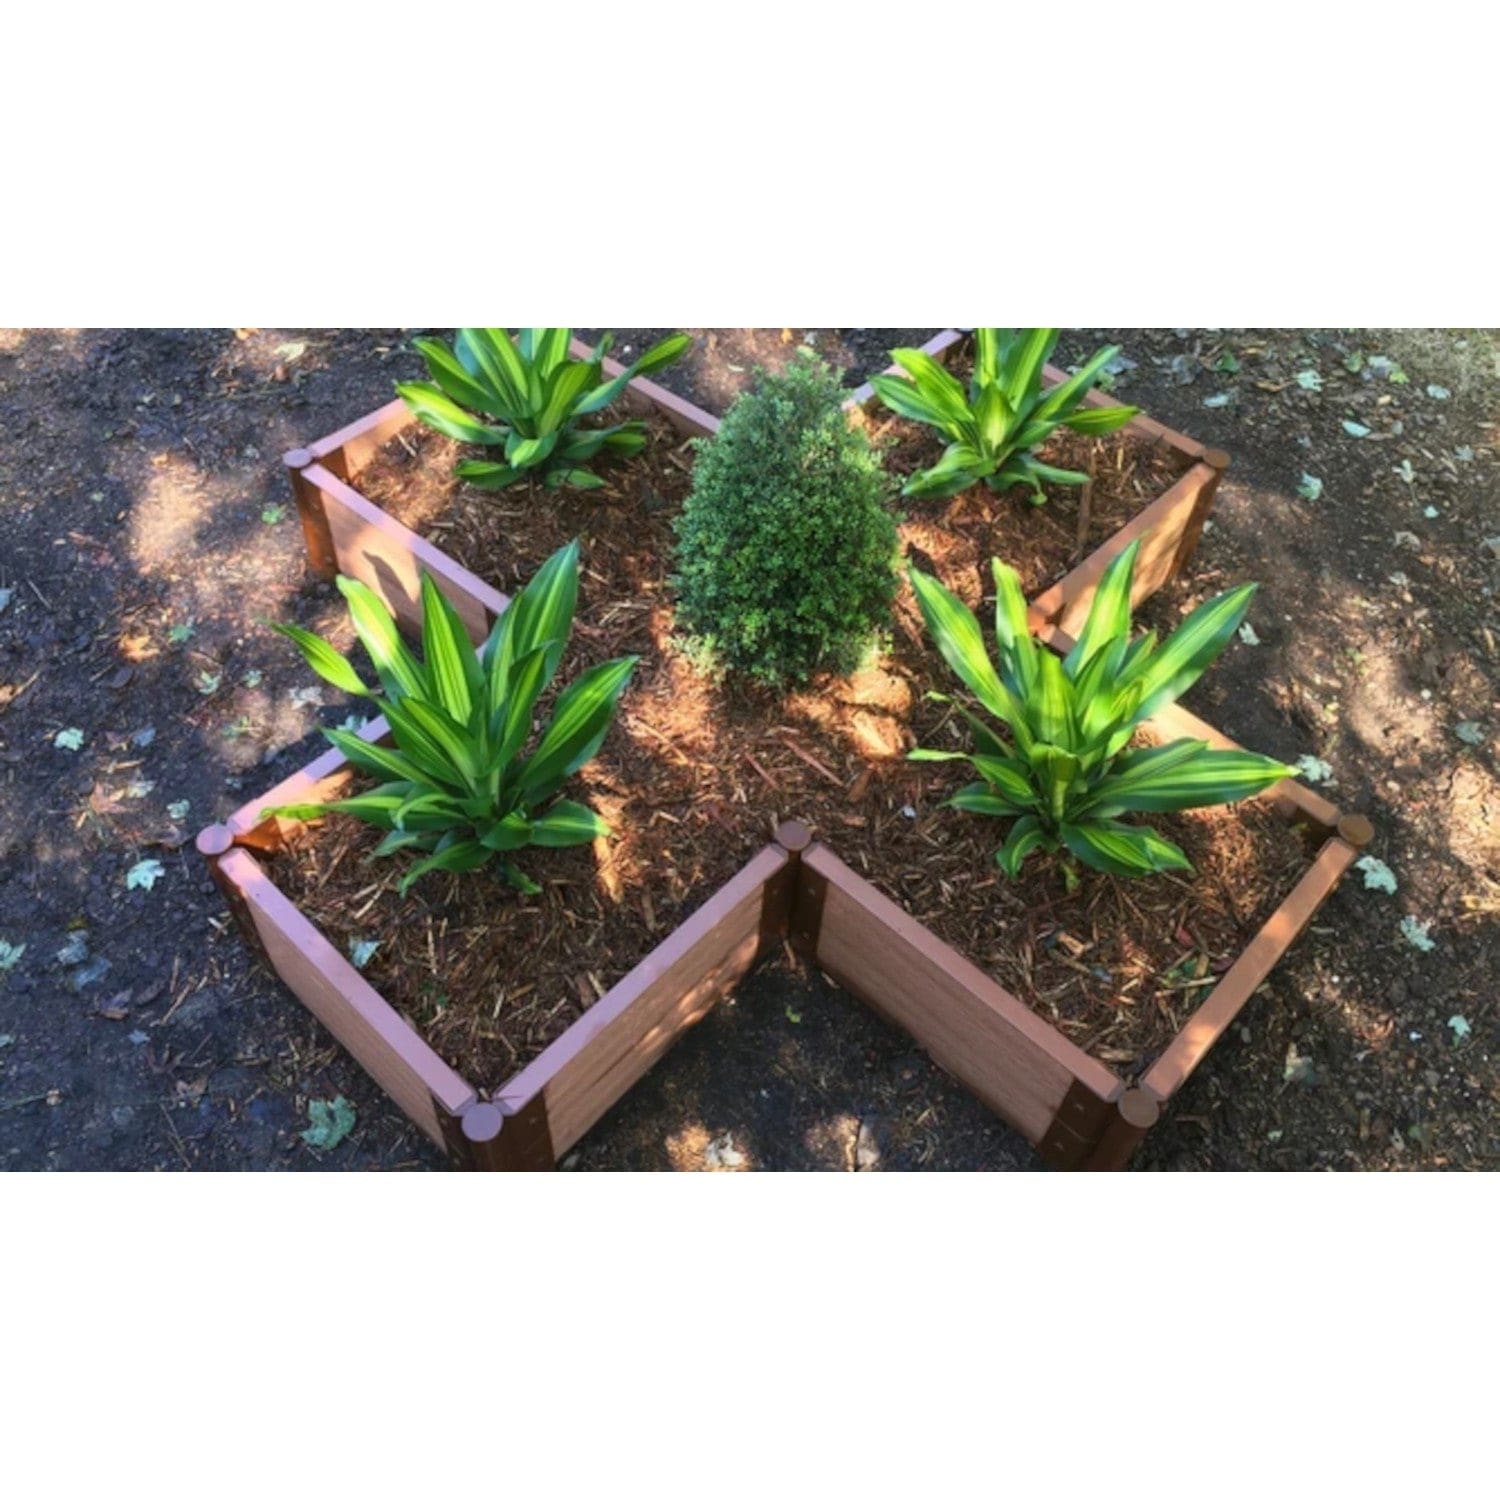 Frame It All Gardening Accessories Frame It All | Tool-Free Military Medallion Raised Garden Bed (Kit Cross) 6' X 6' X 11" - Classic Sienna - 2" Profile 200002487